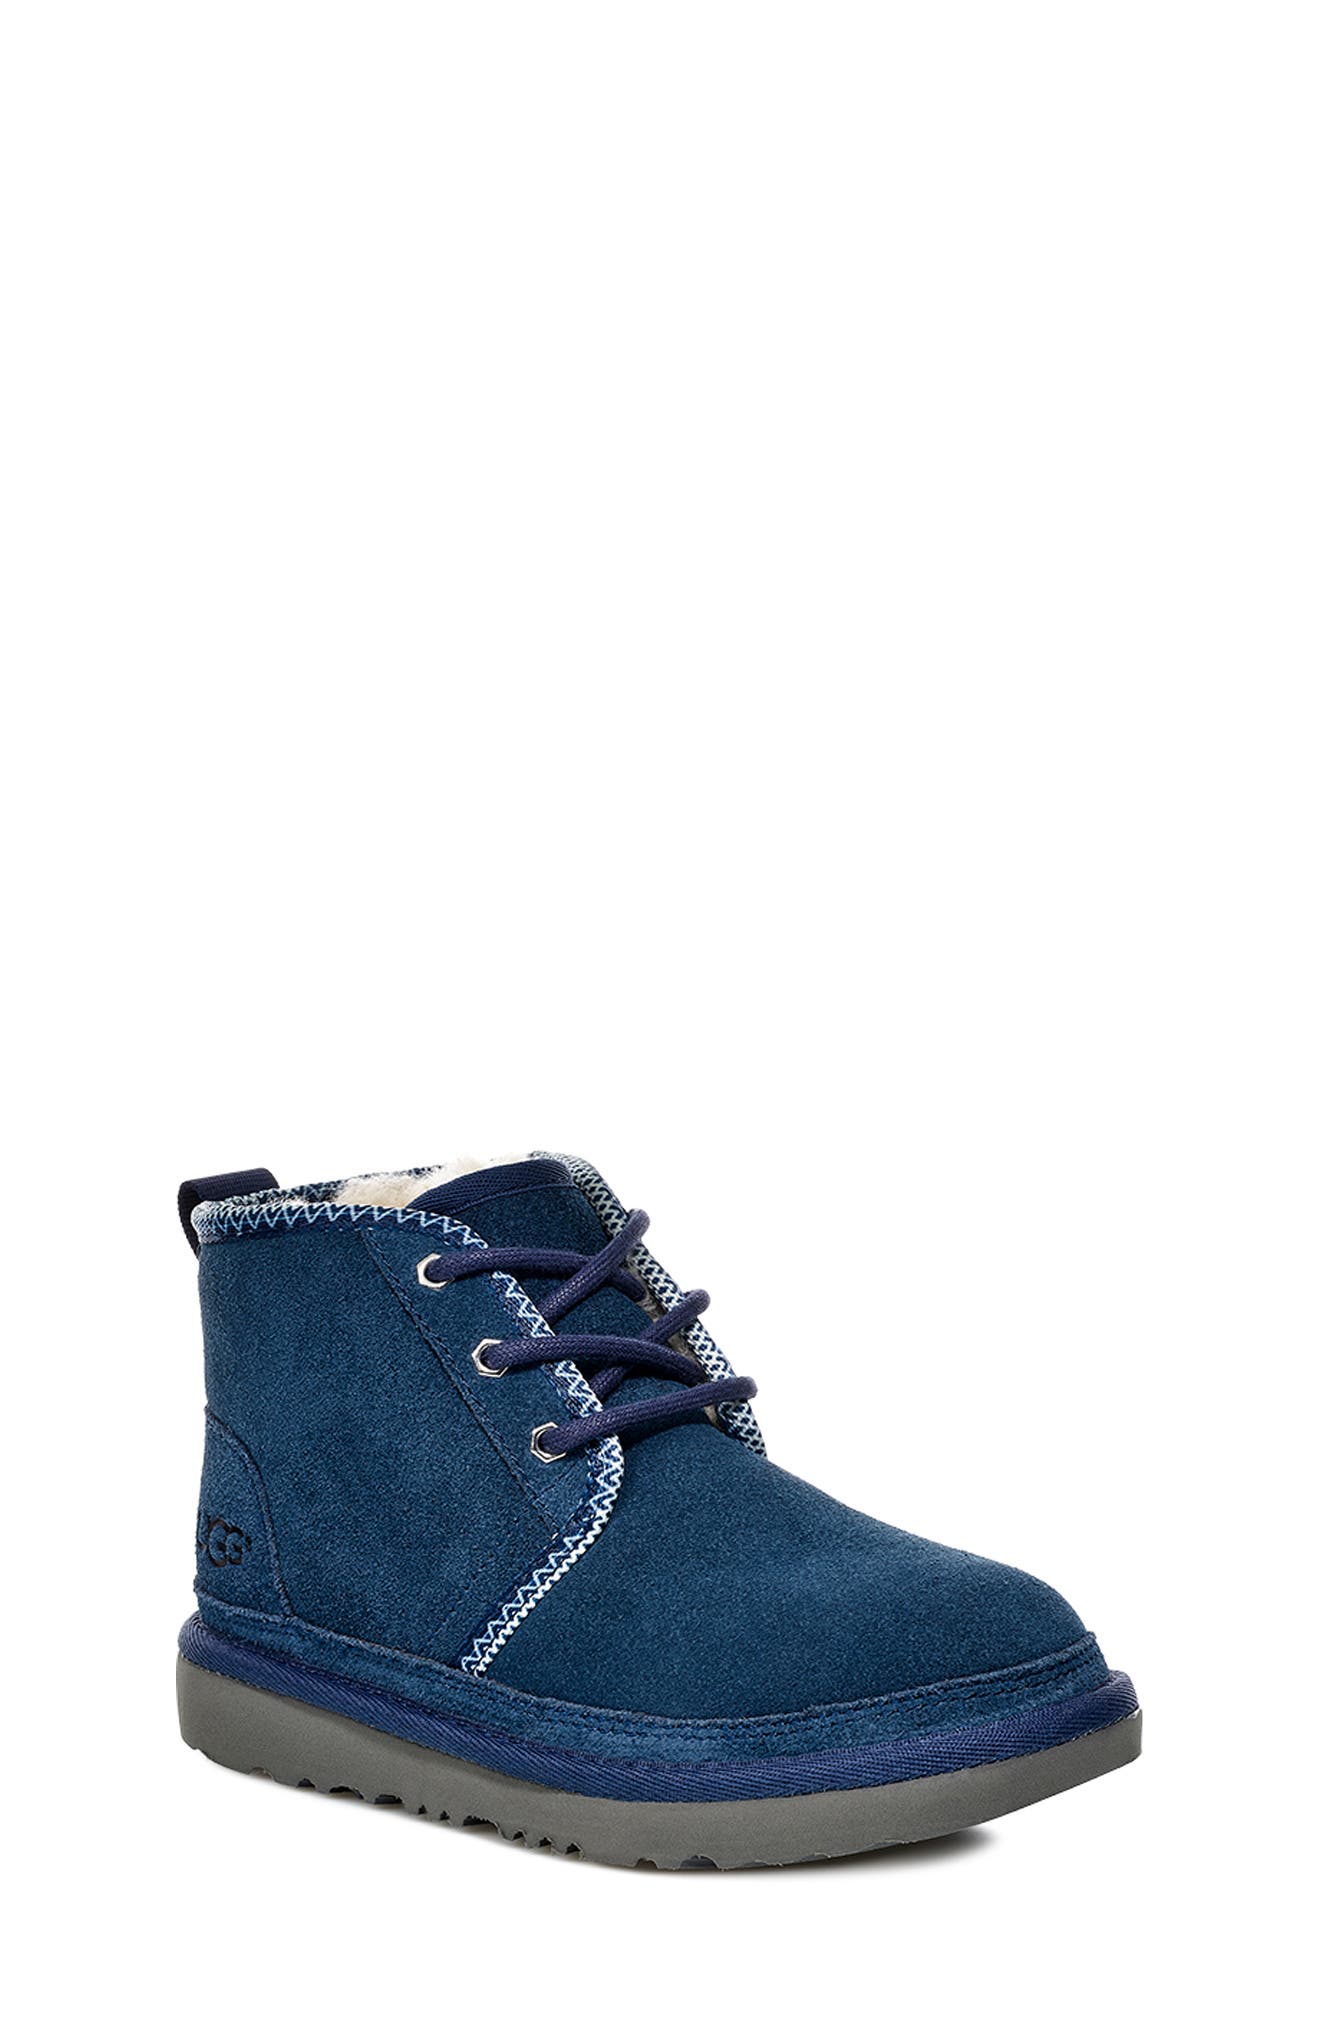 navy blue and white uggs